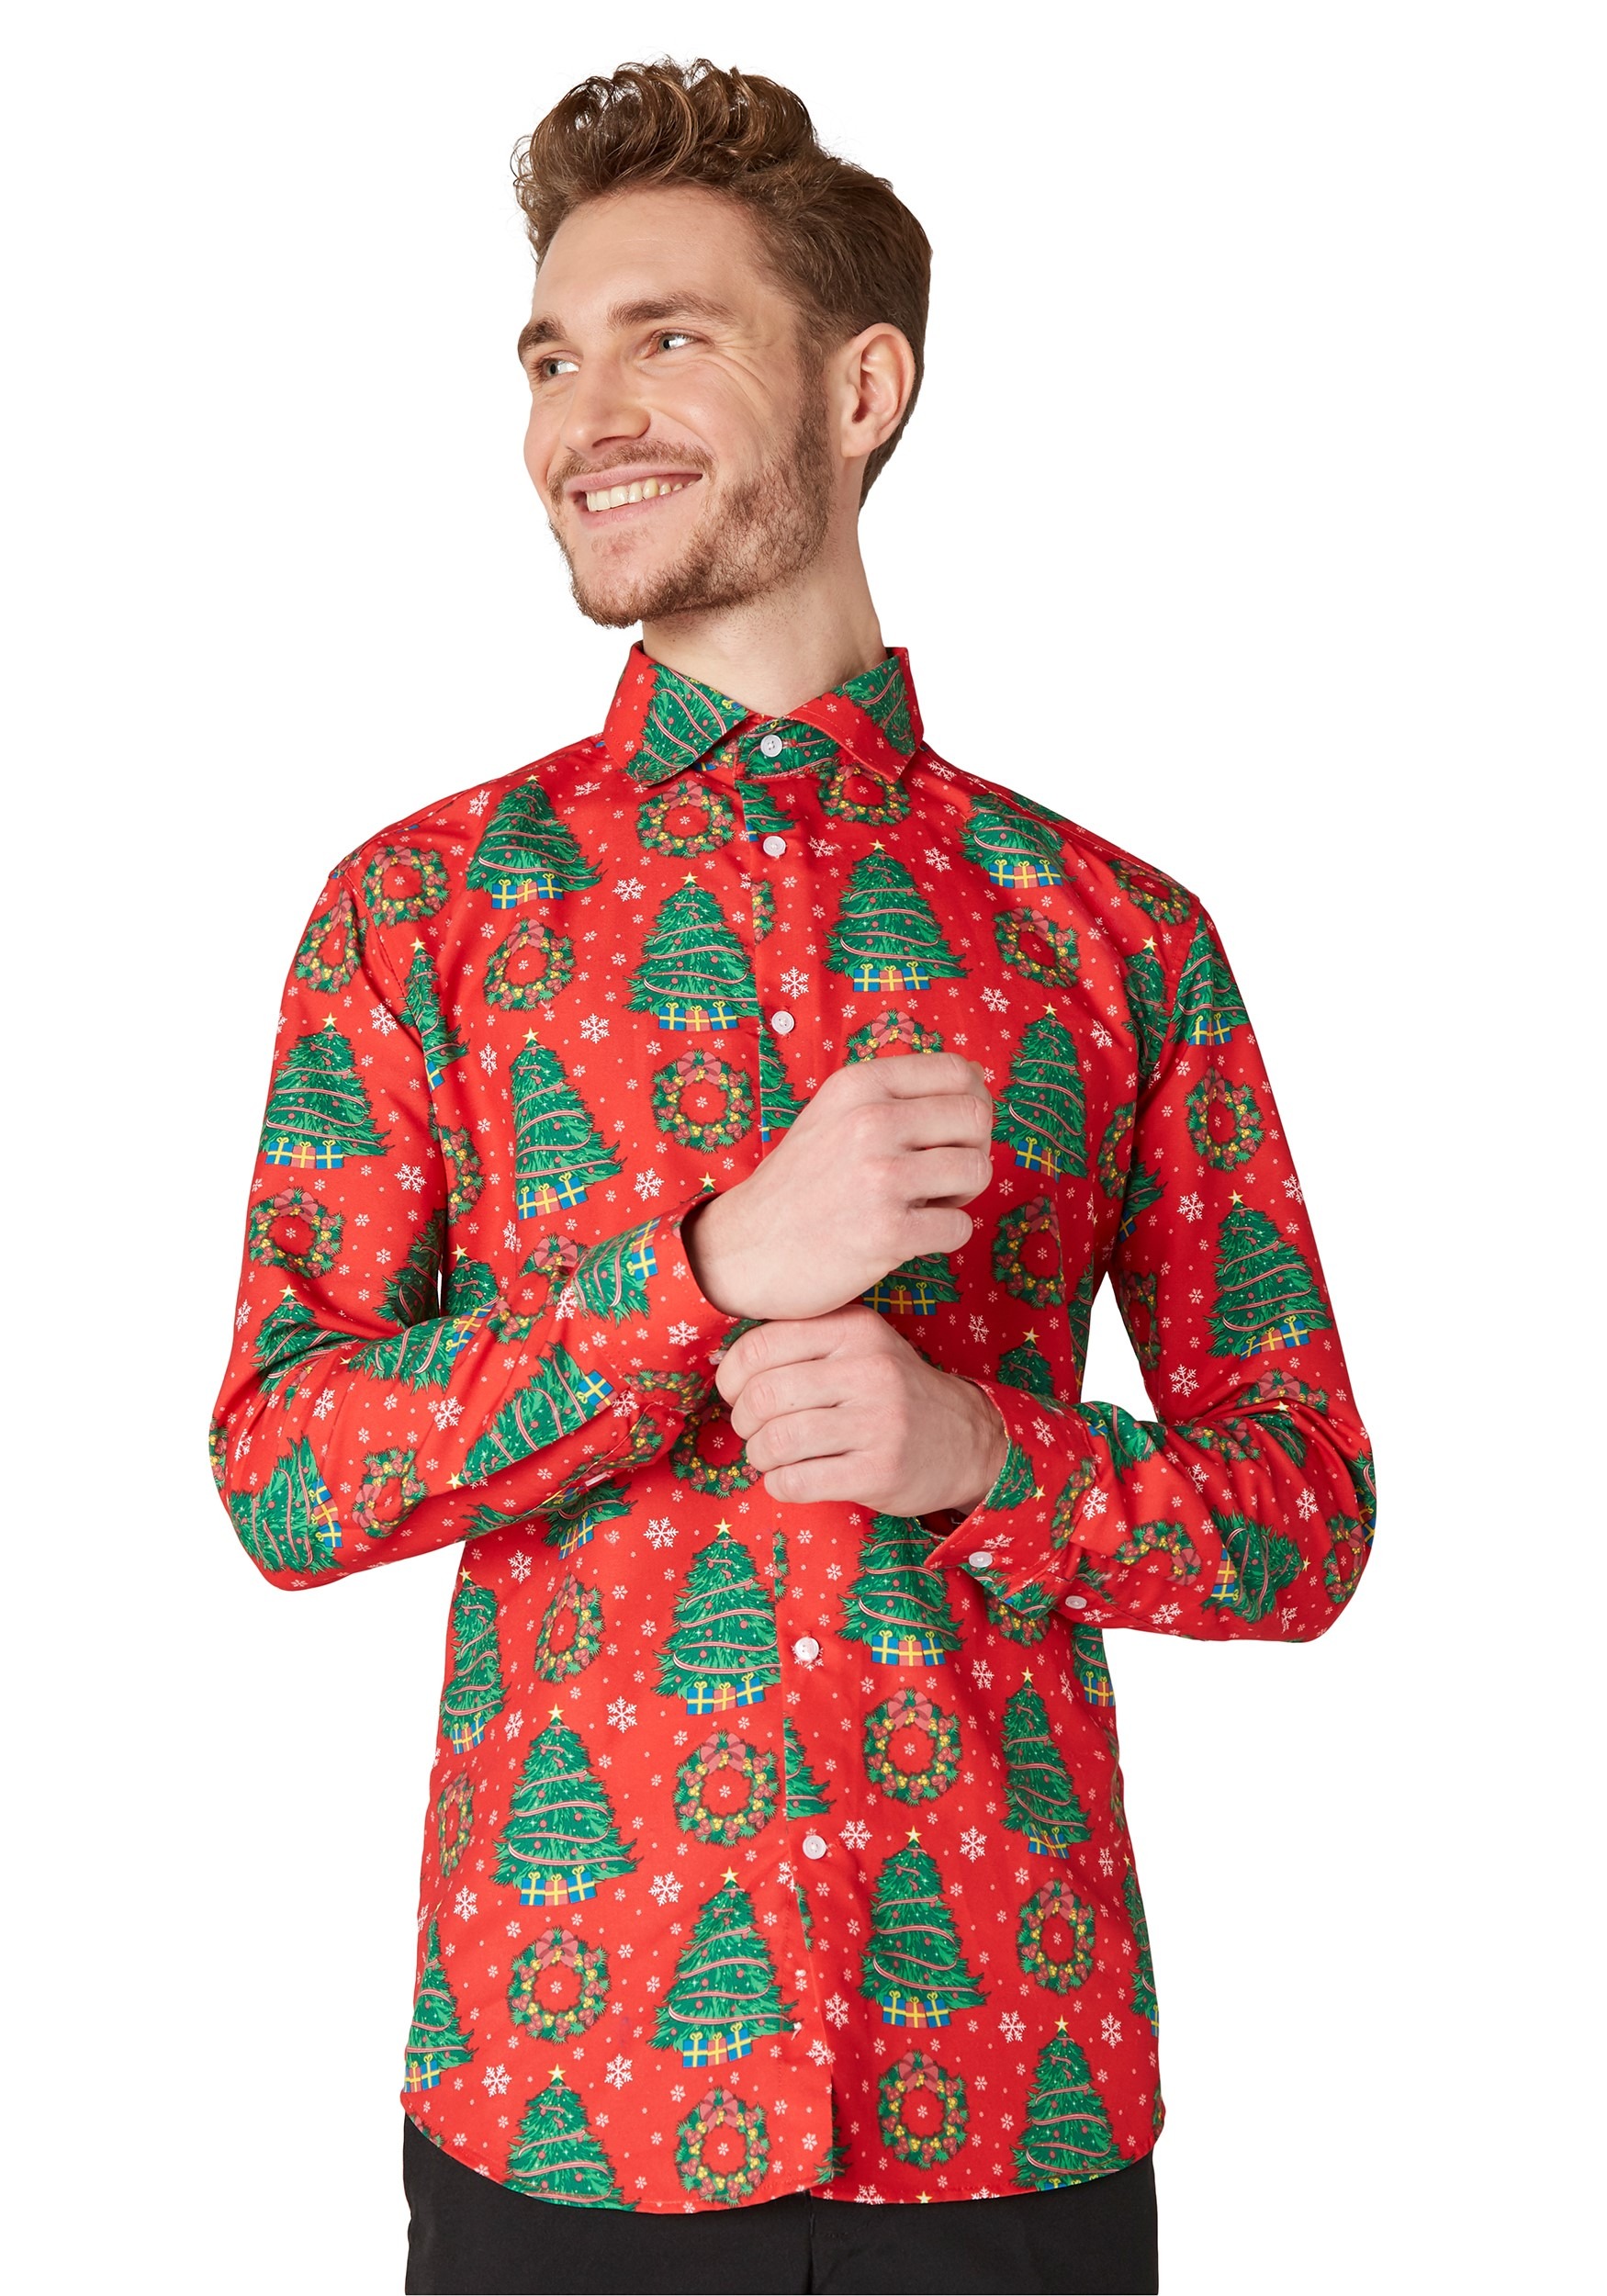 Suitmeister Christmas Trees Men's Red Shirt